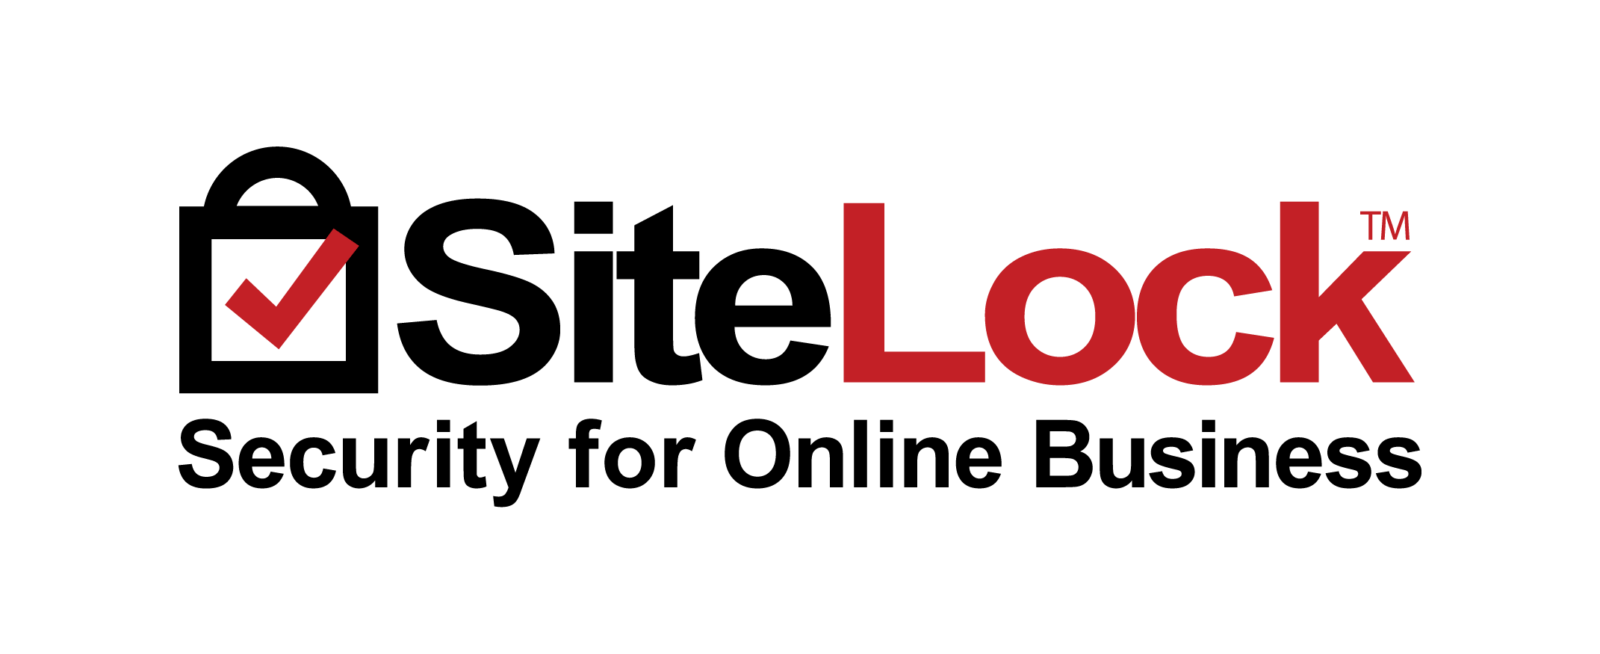 What is A sitelock security